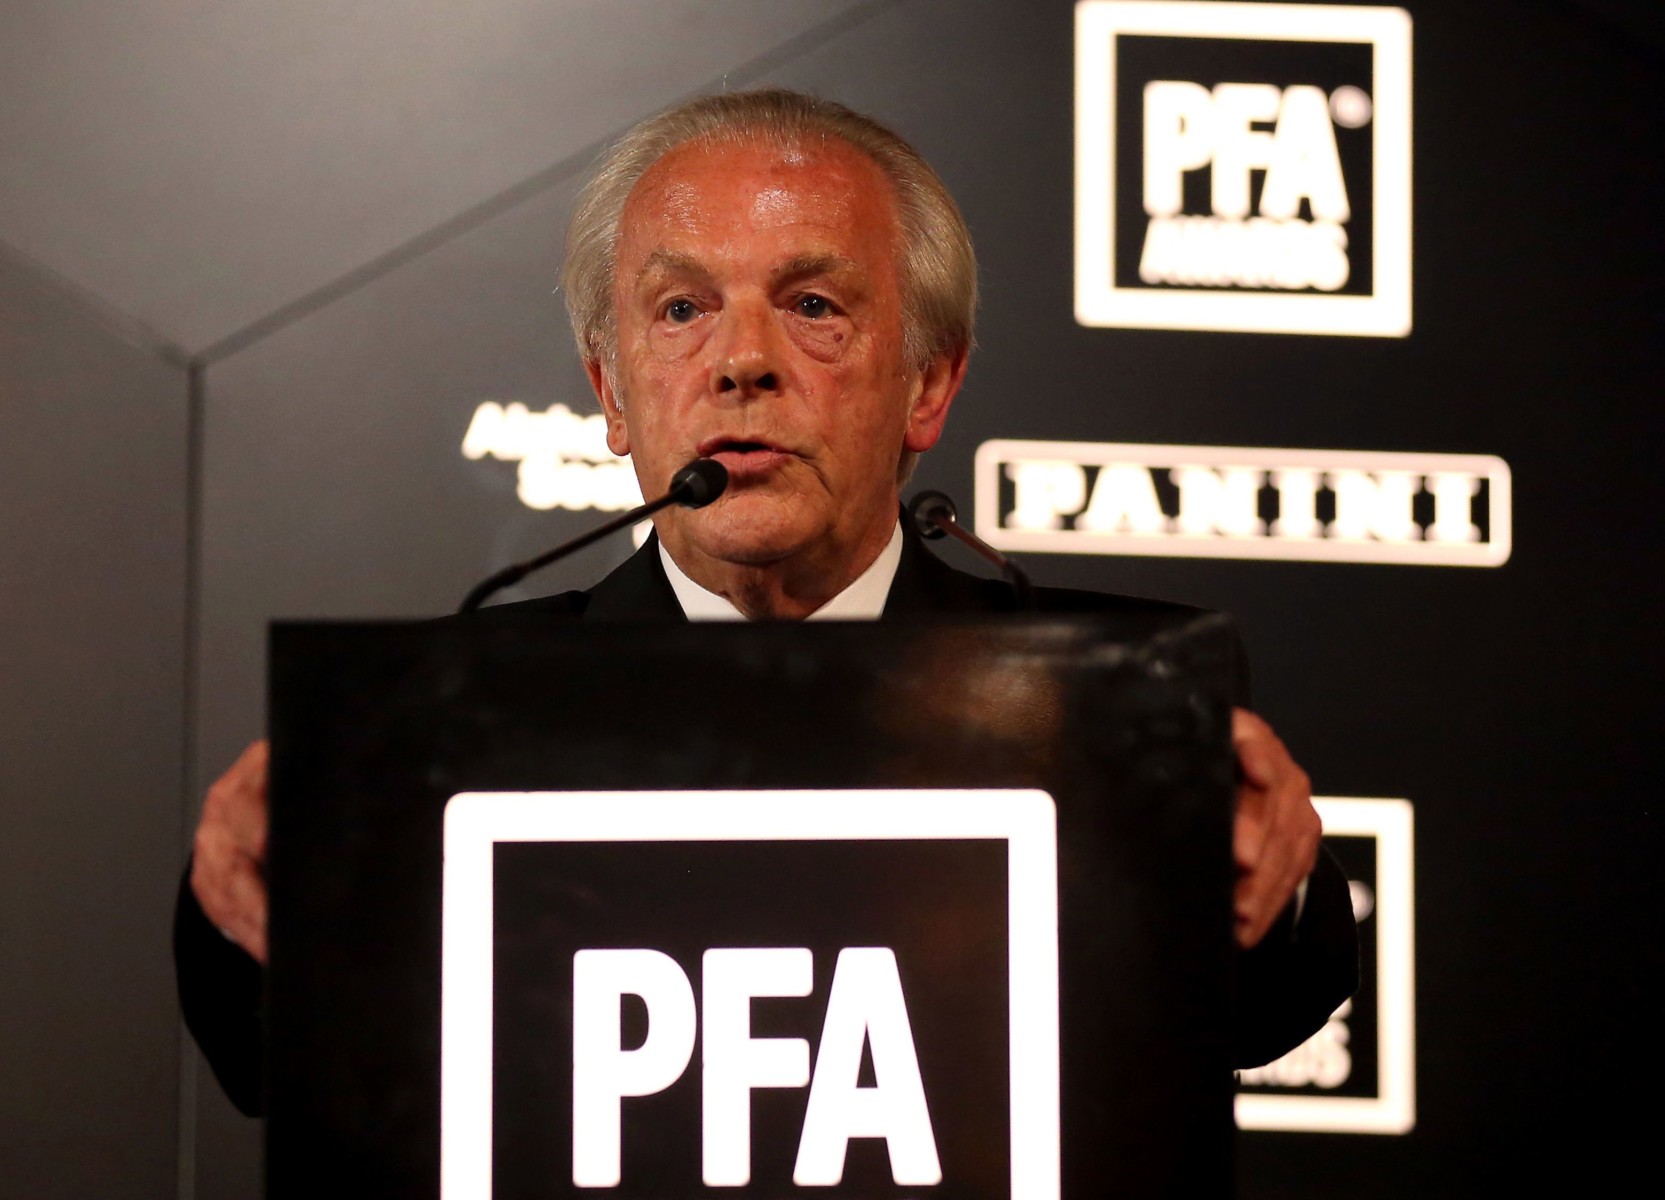 PFA boss Gordon Taylor seems to have set a bad example of elite-level players but they have been targeted disproportionately